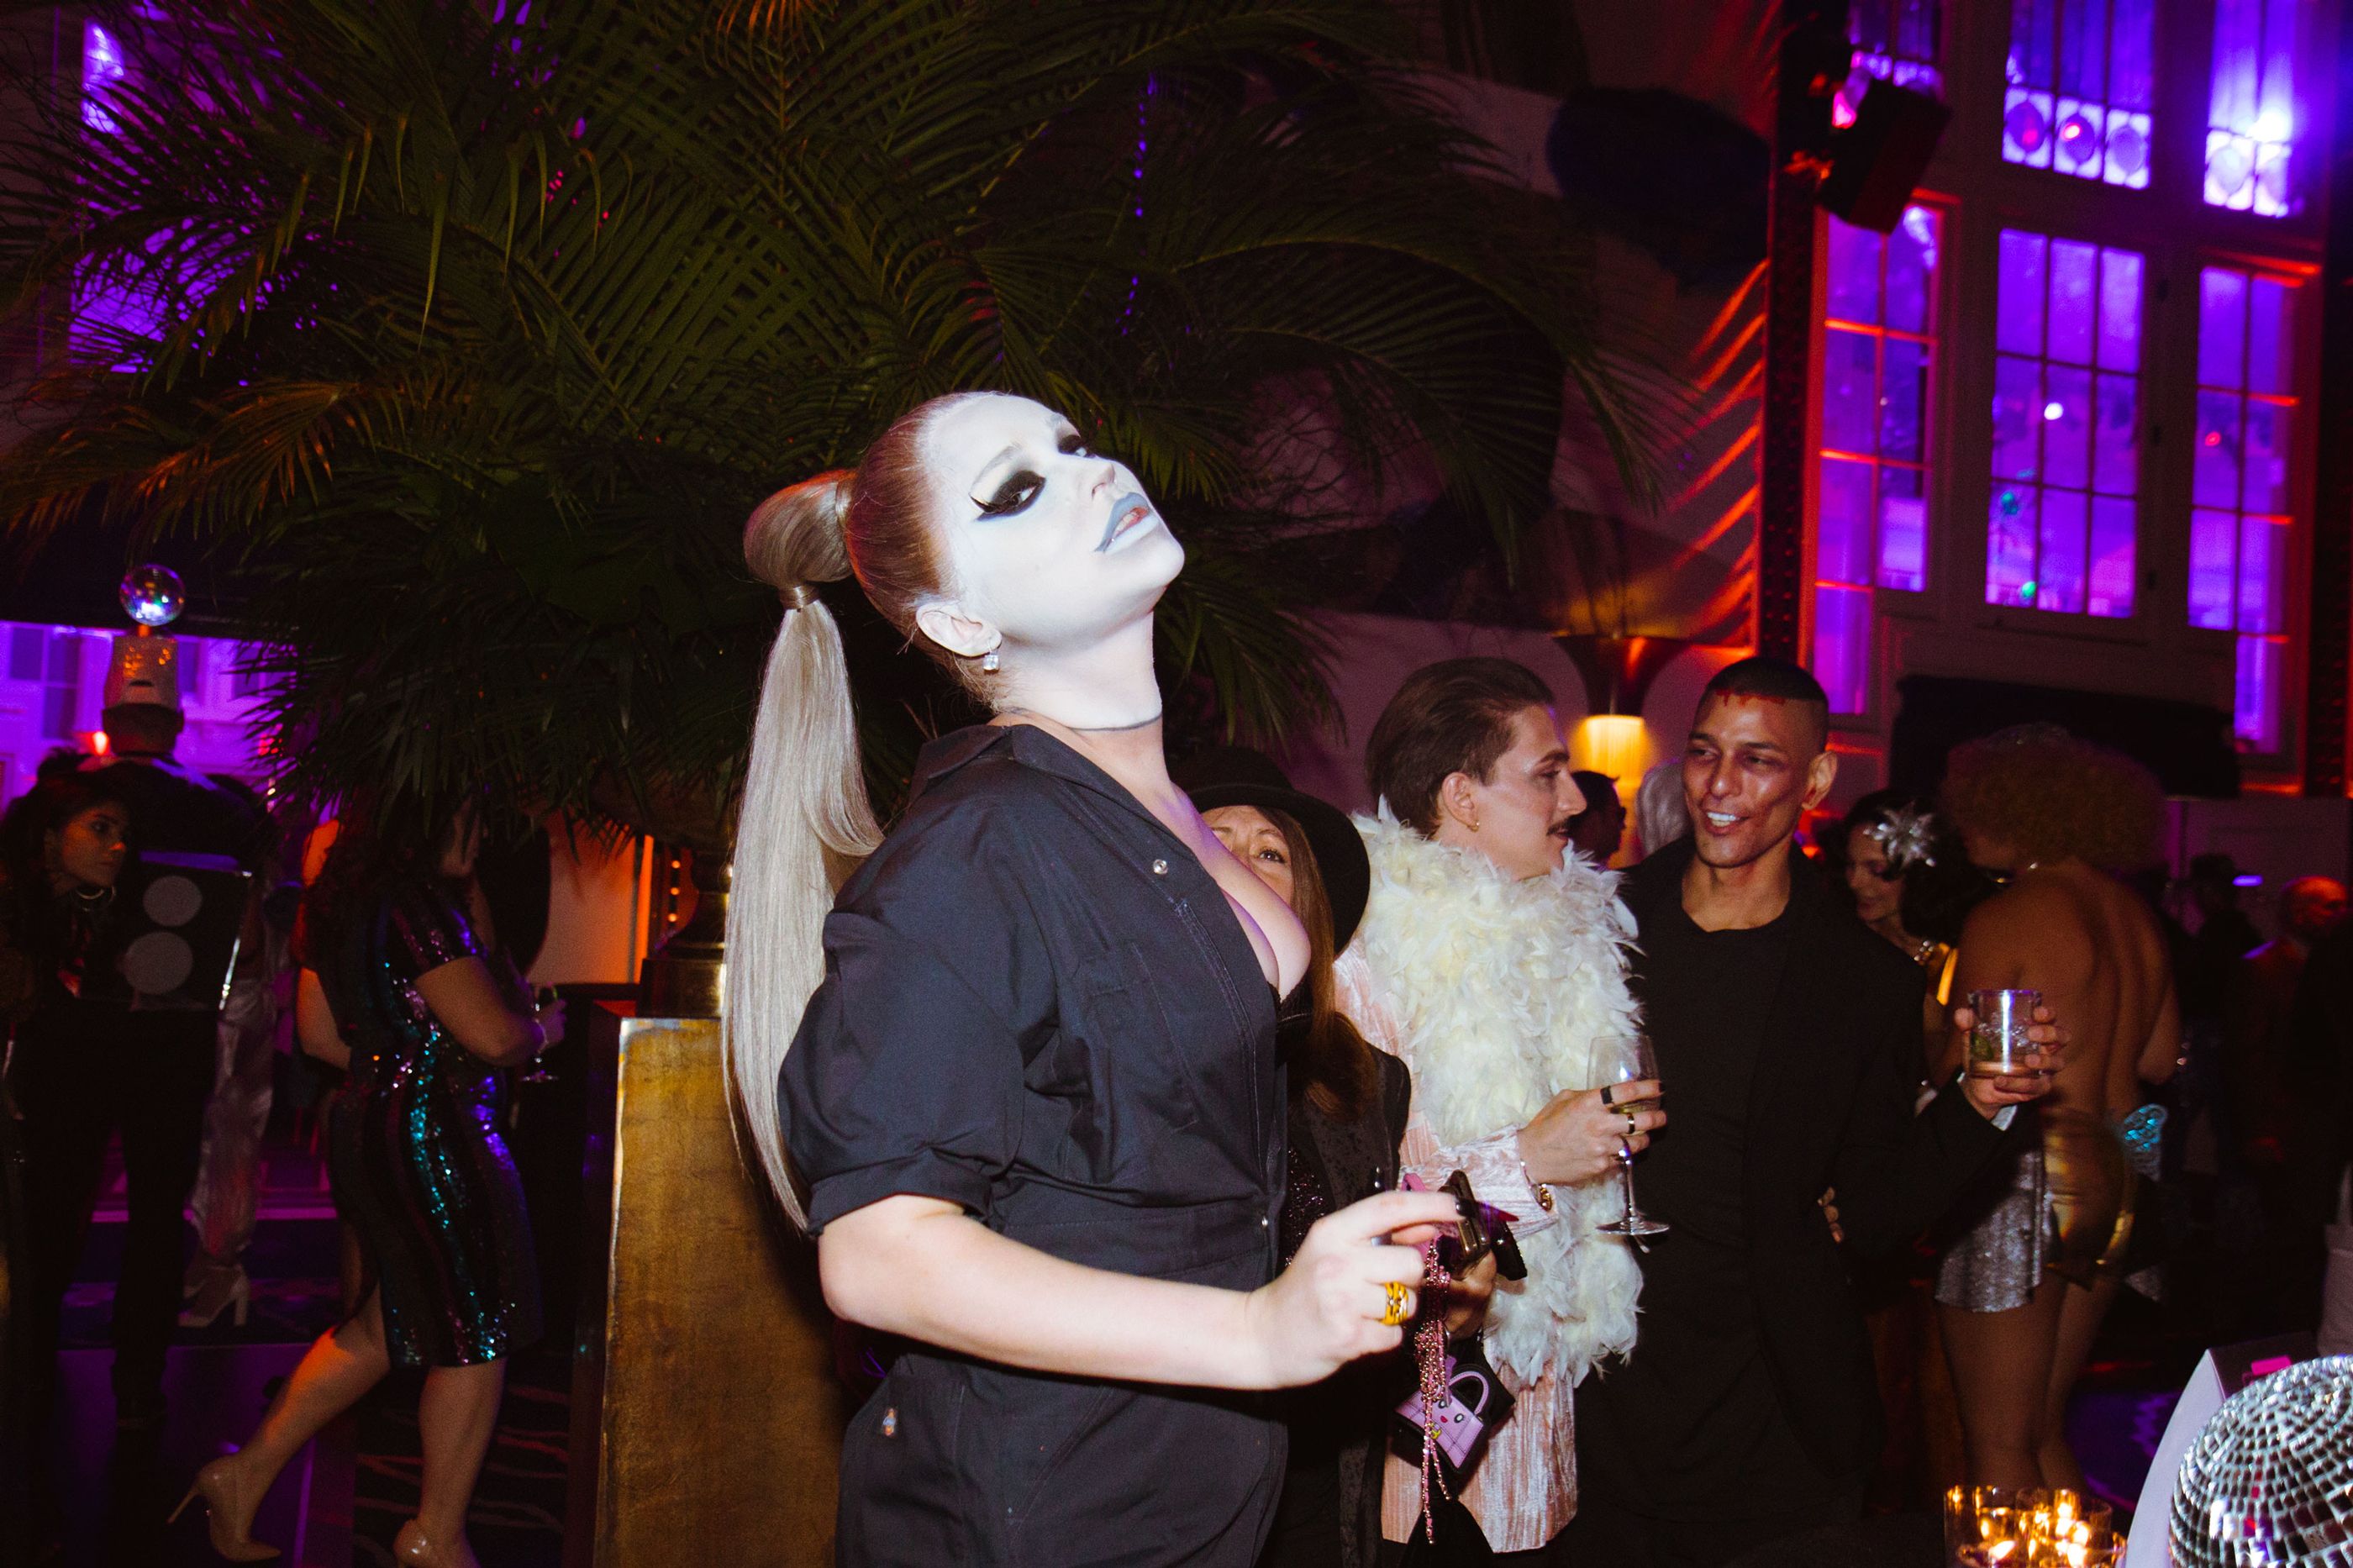 Sckul Xxx Gala - Partying With Kim Petras at Bette Midler's Halloween Gala